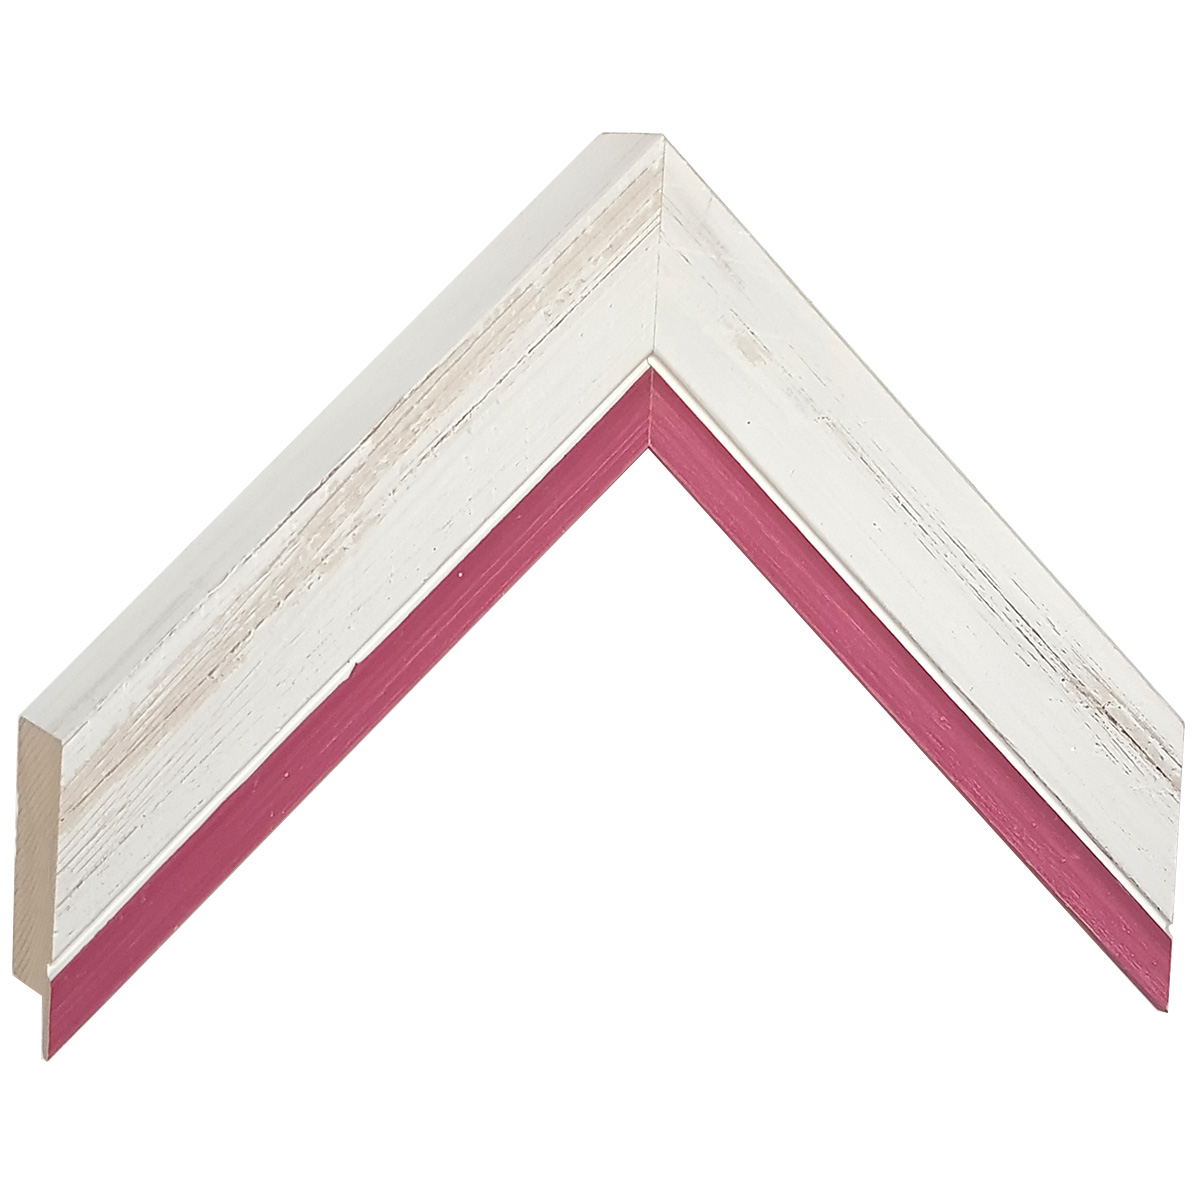 Moulding finger-jointed pine height 33mm - White, fucsia edge - Sample